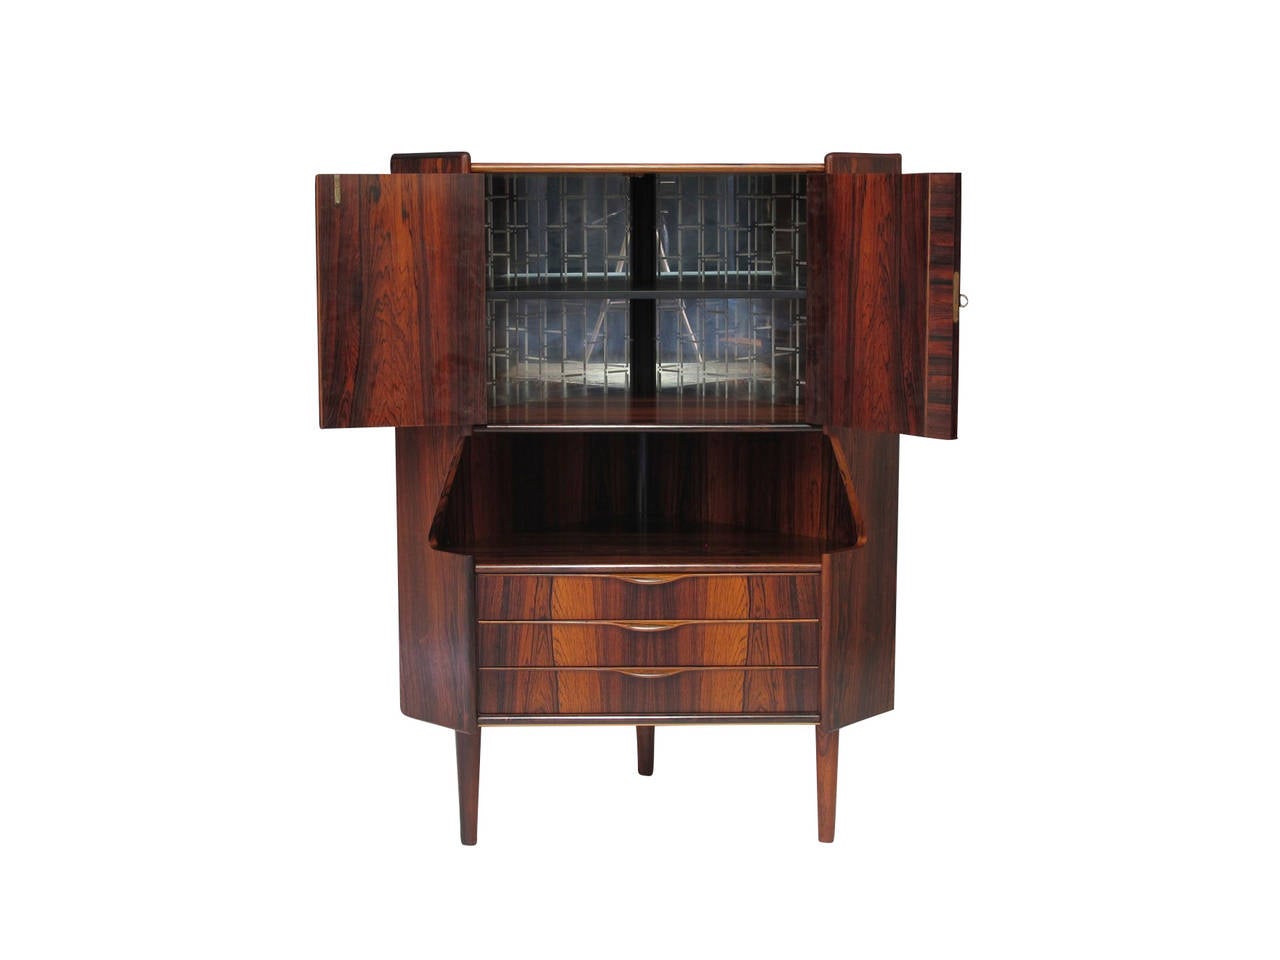 Mid-century Brazilian rosewood corner cabinet with with rich book-matched grain patterns. Locking doors reveal an interior bar with mirrored back; open space and three drawers below. Raised on round tapered legs. Requires 24.75